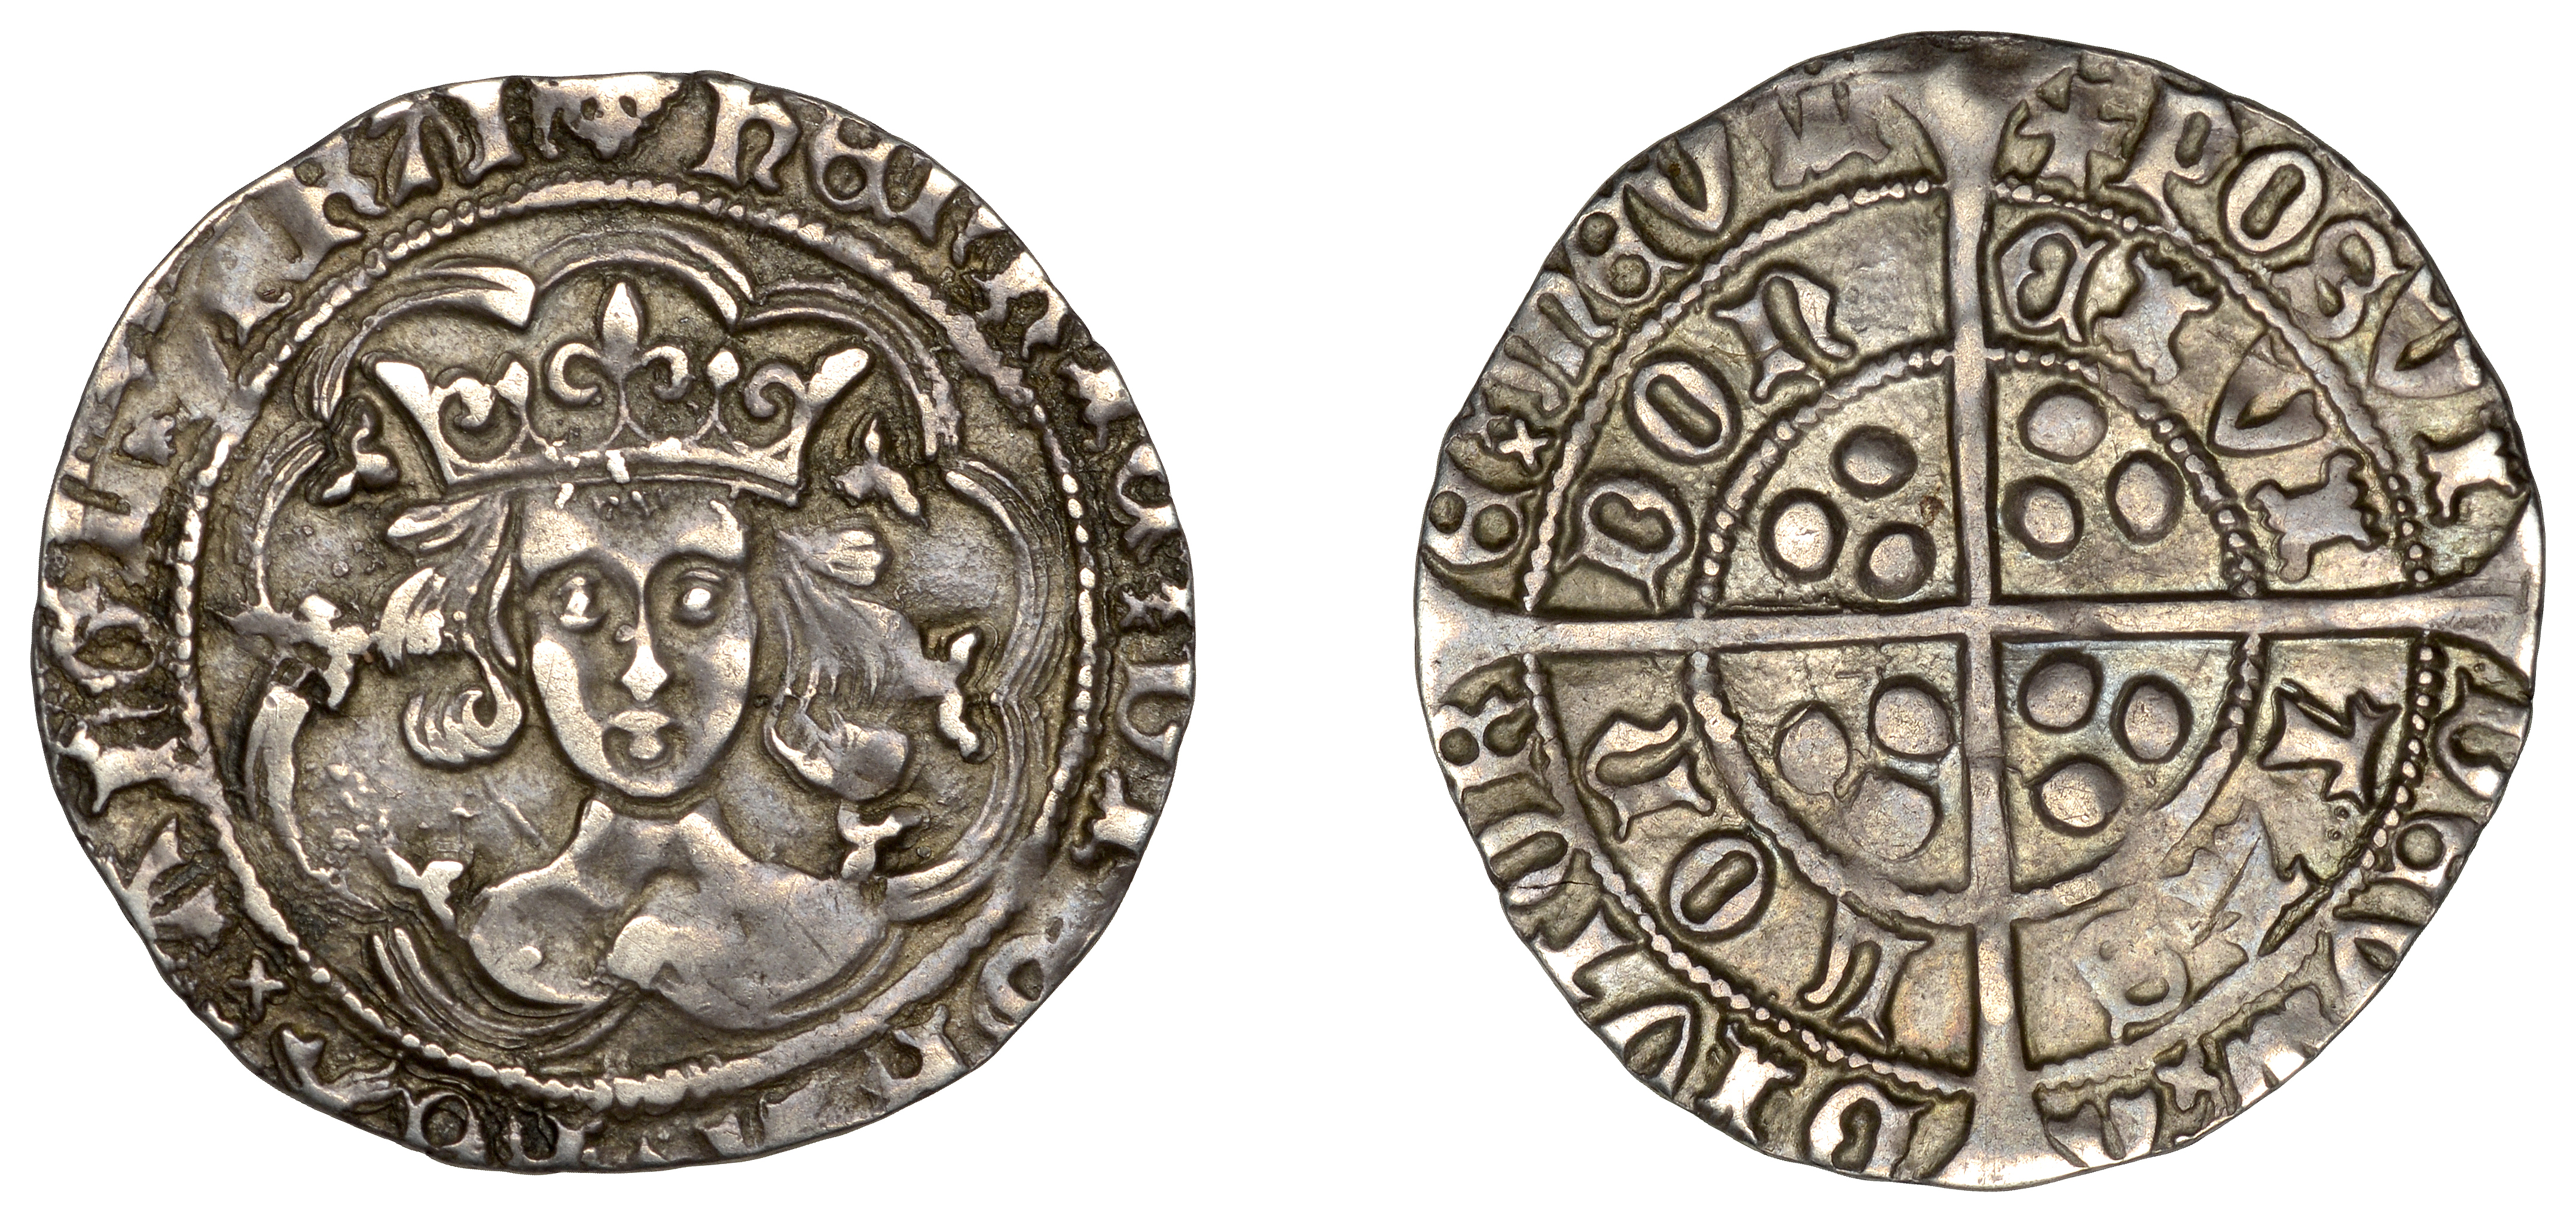 Henry VI (First reign, 1422-1461), Leaf-Trefoil issue, Groat, class A, London, mm. crosses I...